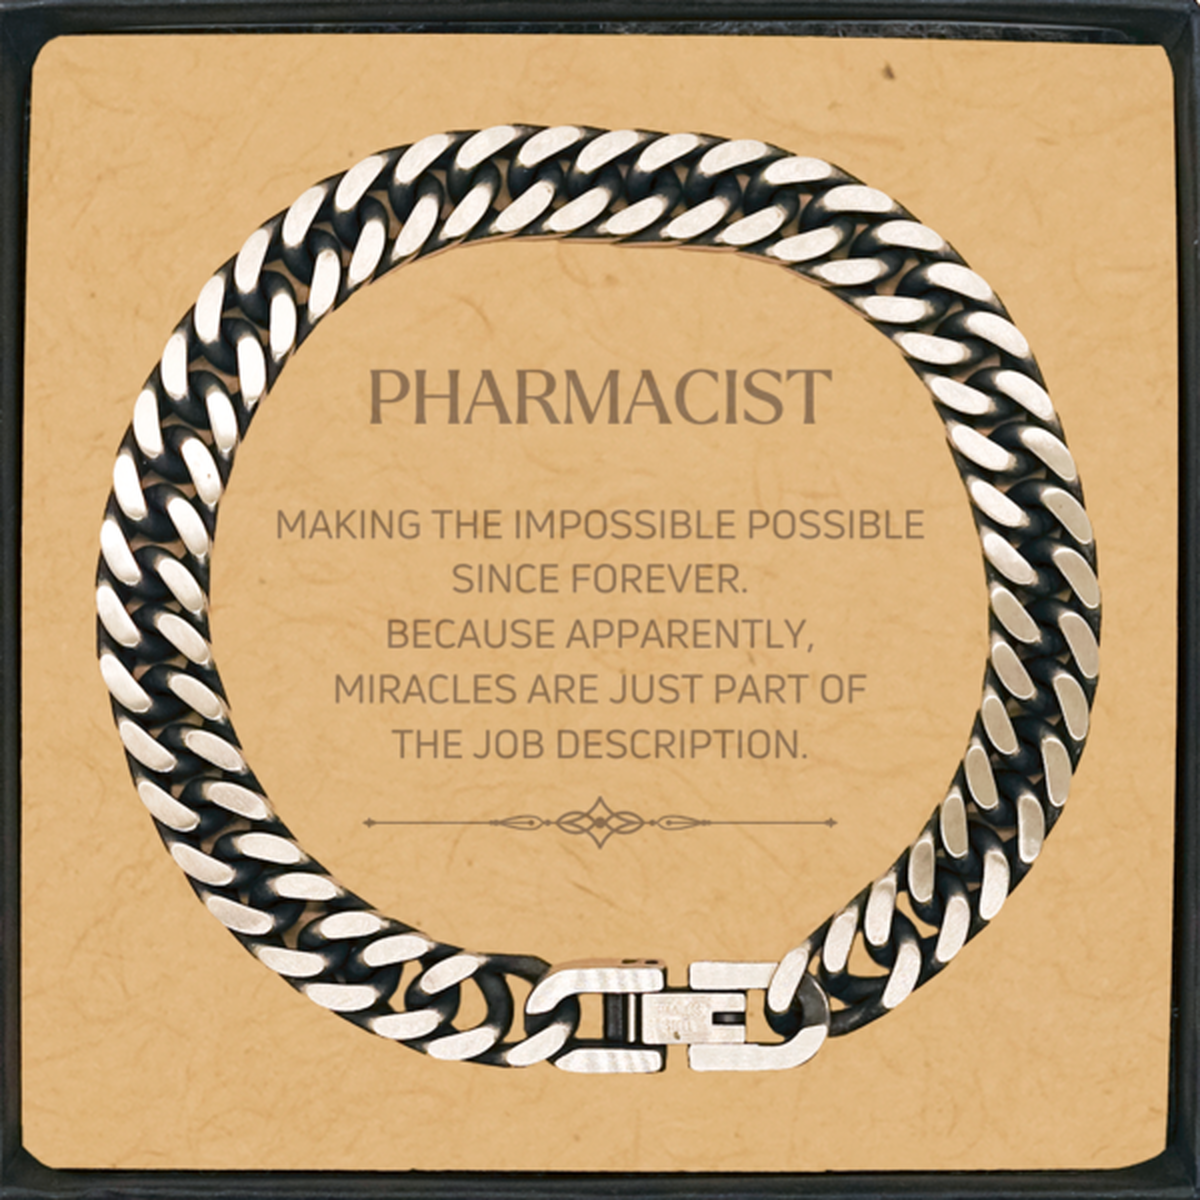 Funny Pharmacist Gifts, Miracles are just part of the job description, Inspirational Birthday Cuban Link Chain Bracelet For Pharmacist, Men, Women, Coworkers, Friends, Boss